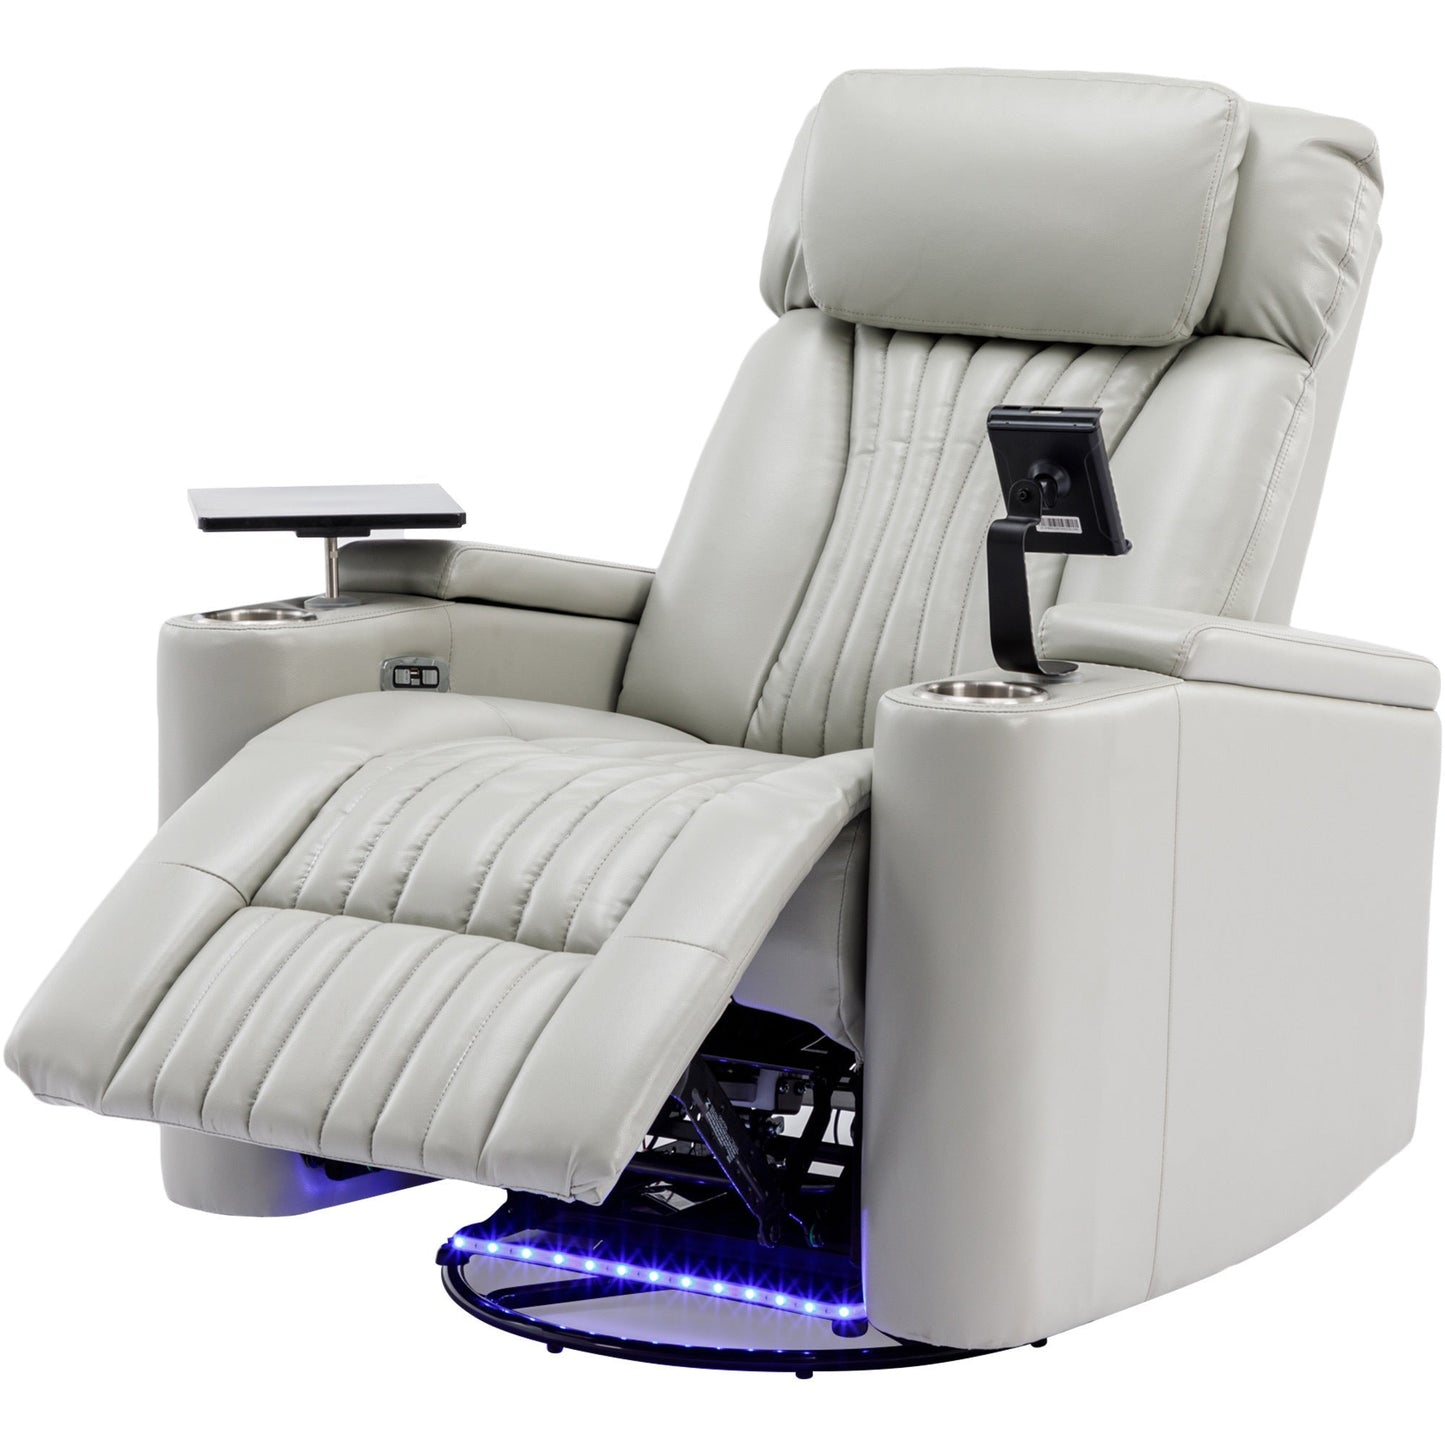 270° Power Swivel Recliner,Home Theater Seating With Hidden Arm Storage and  LED Light Strip,Cup Holder,360° Swivel Tray Table,and Cell Phone Holder,Soft Living Room Chair,Grey